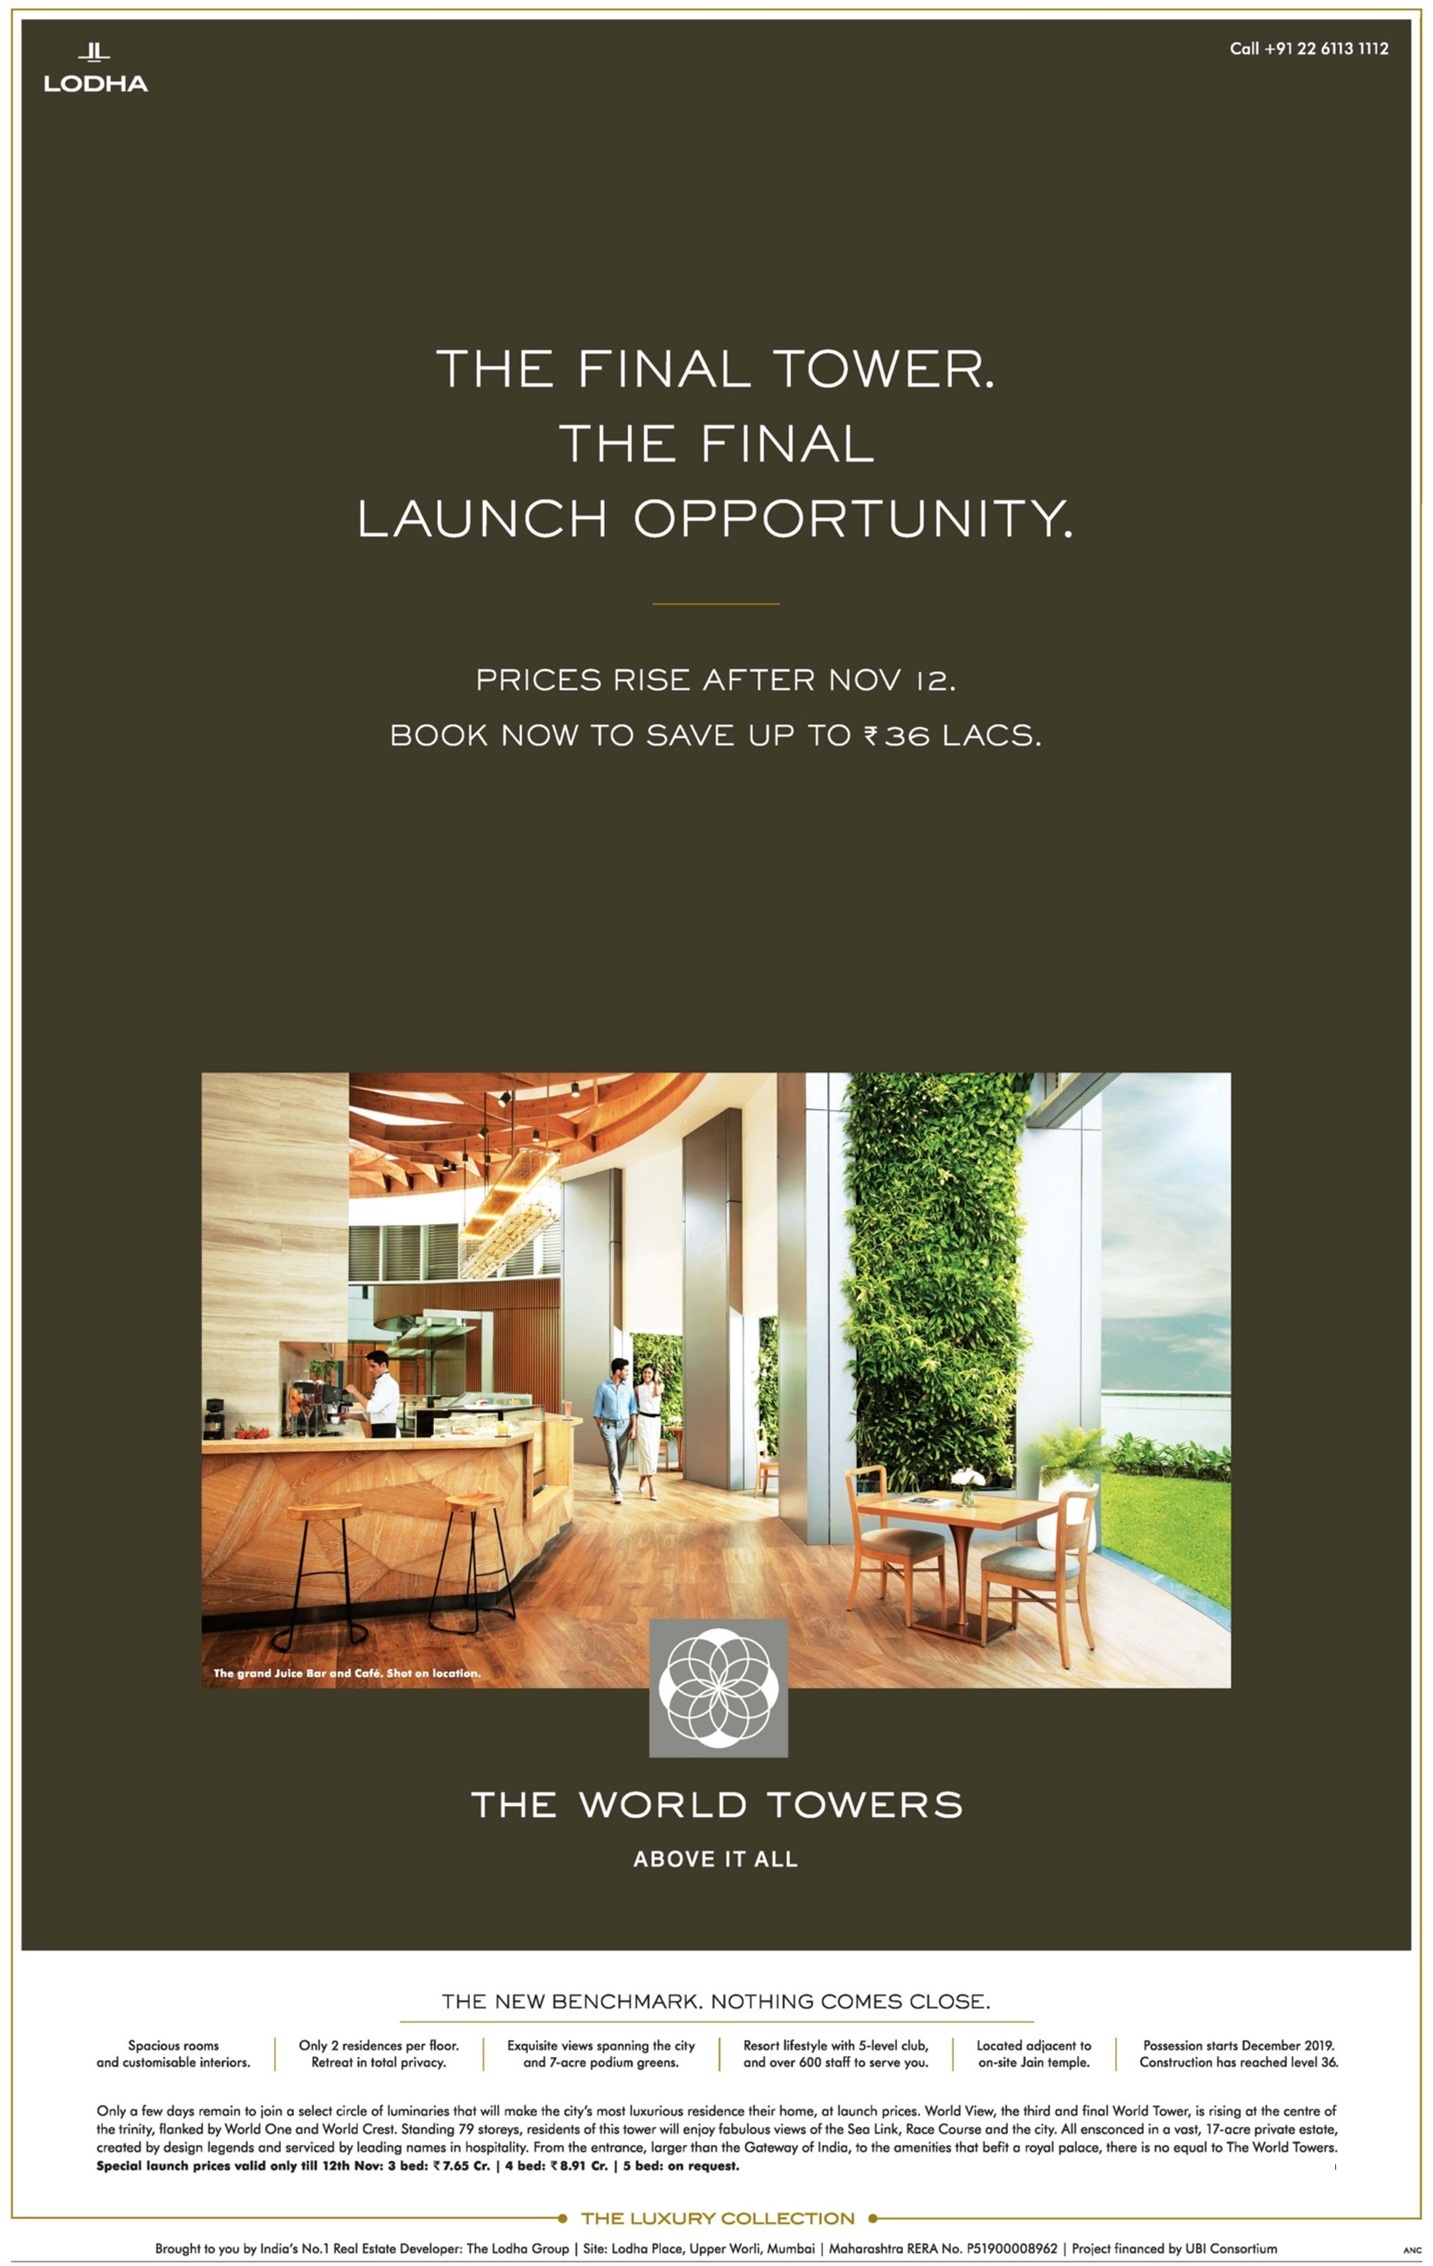 The final launch opportunity for home buyers at the final tower of The World Towers in Mumbai Update